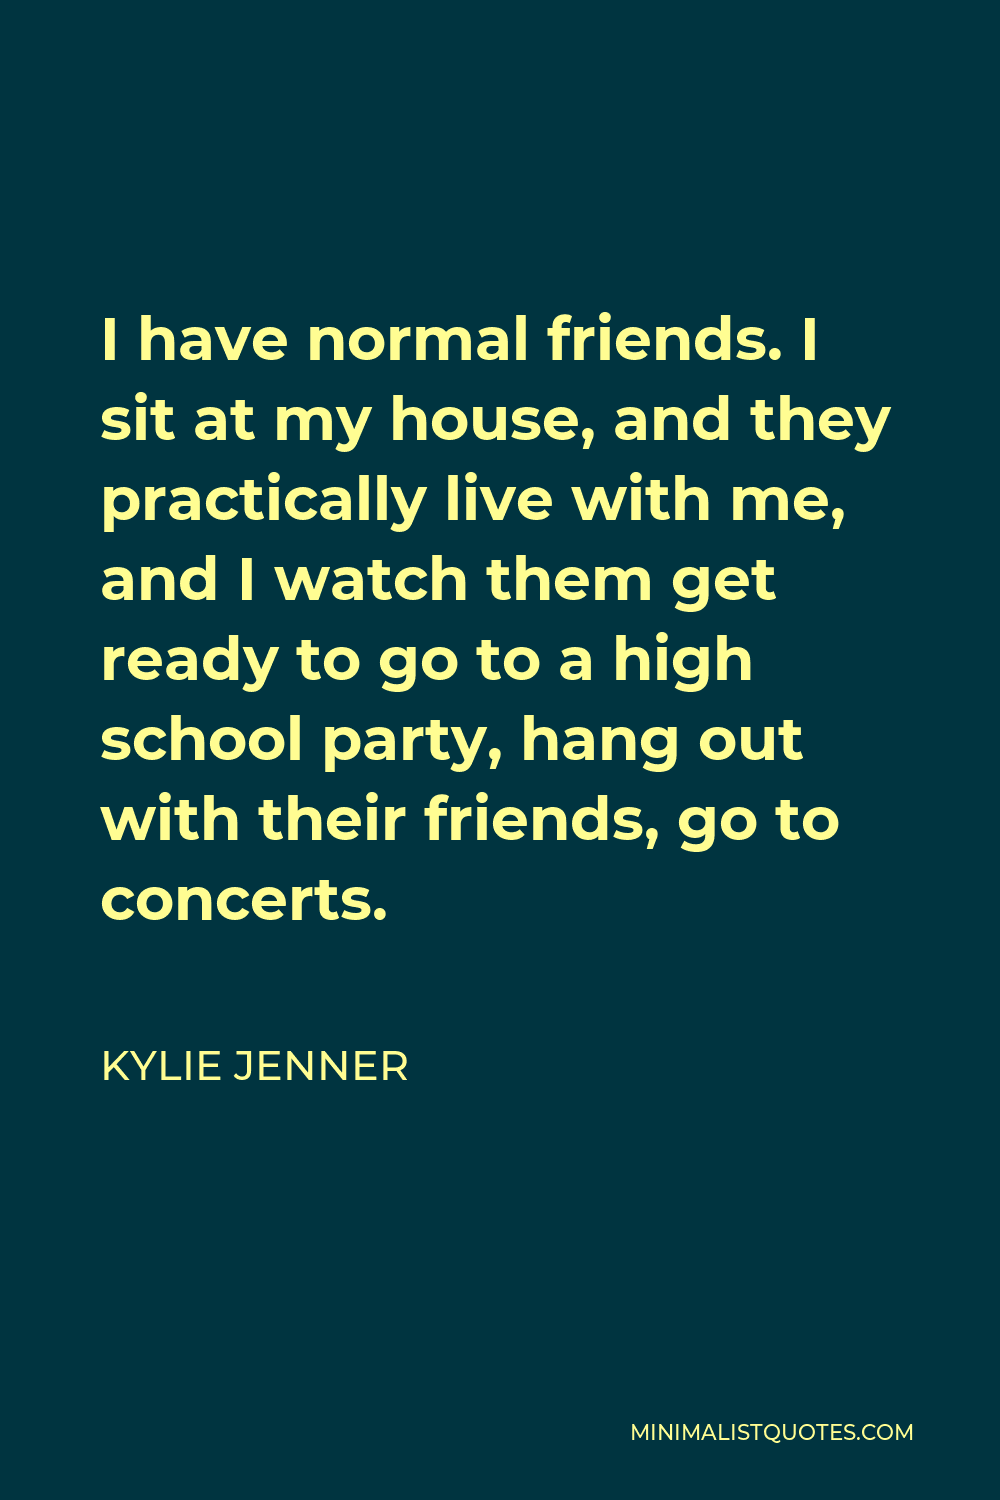 Kylie Jenner Quote - I have normal friends. I sit at my house, and they practically live with me, and I watch them get ready to go to a high school party, hang out with their friends, go to concerts.